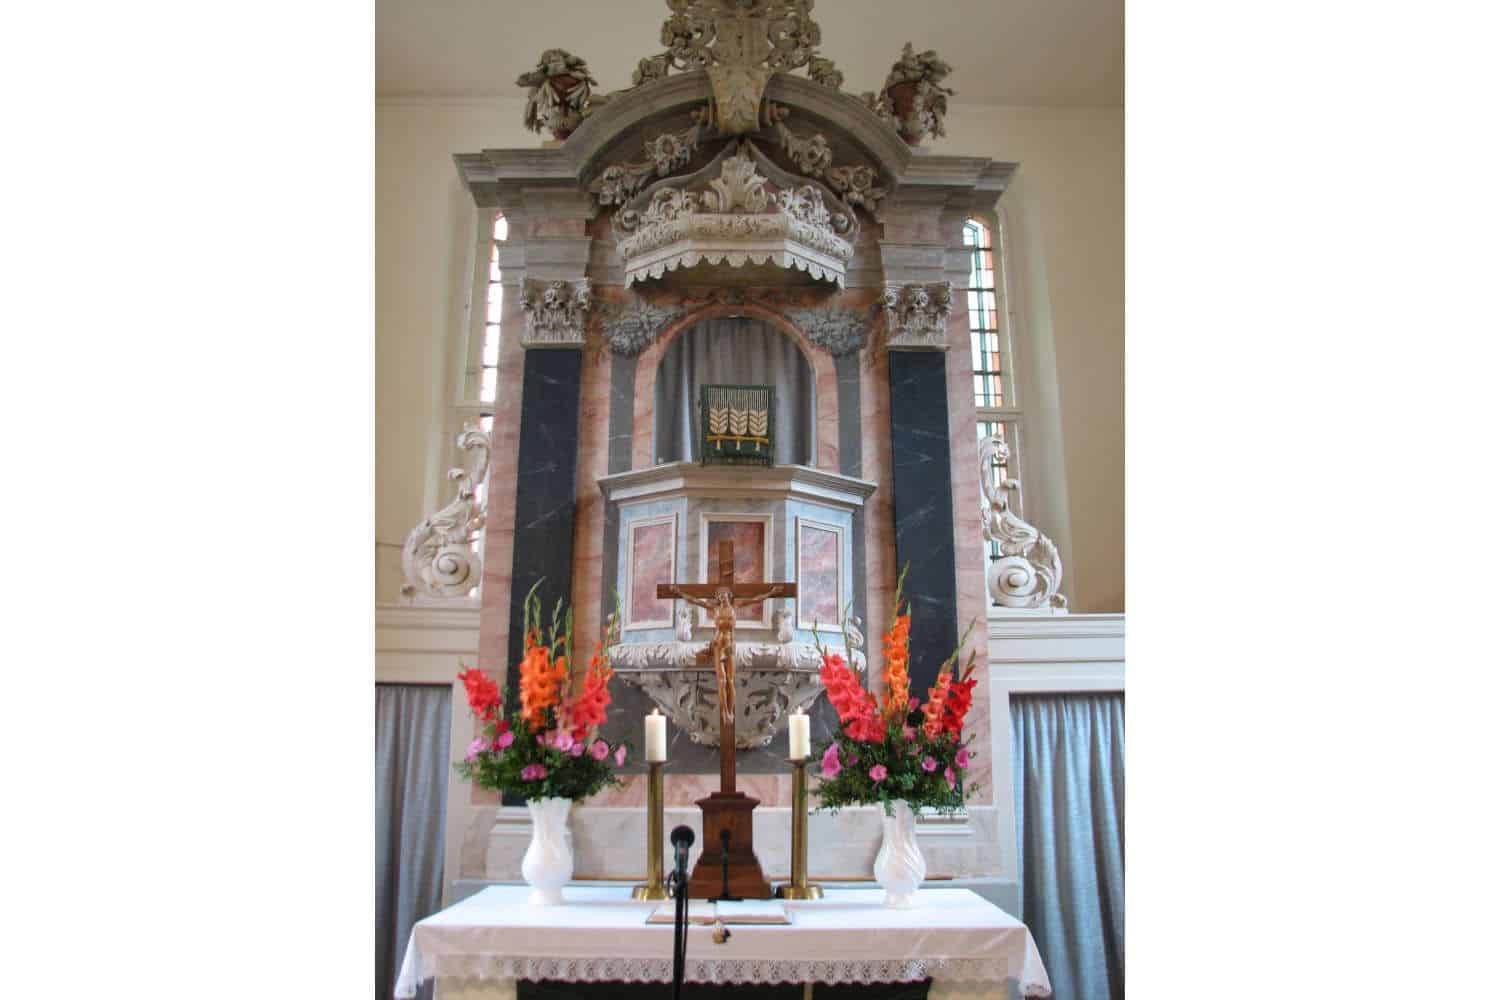 Altar der Kirche Panitzsch. Foto: Ghostwriter123, CC BY-SA 3.0, https://commons.wikimedia.org/w/index.php?curid=29626206